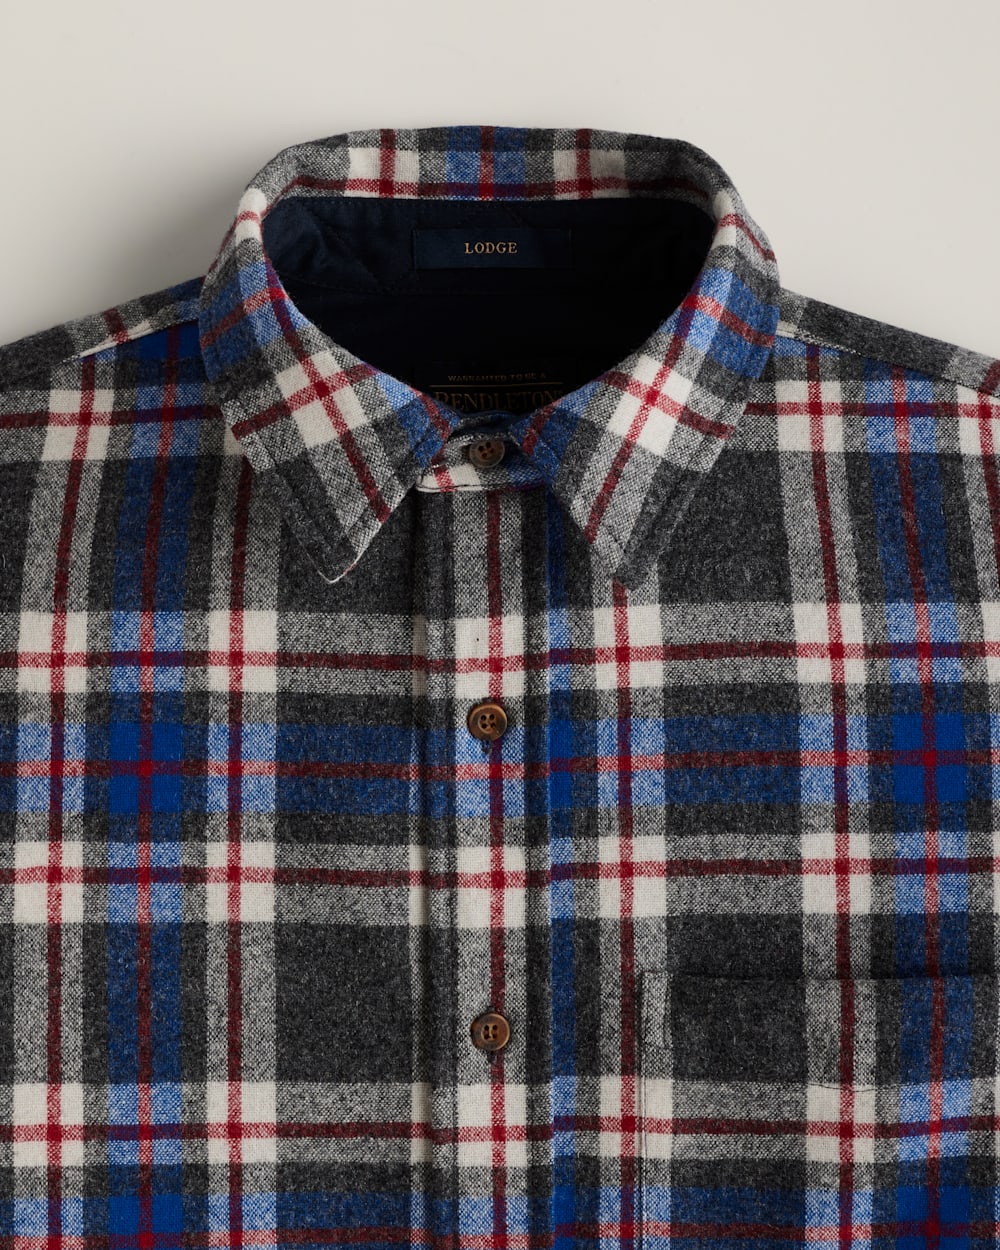 ALTERNATE VIEW OF MEN'S PLAID LODGE SHIRT IN OXFORD MIX image number 2